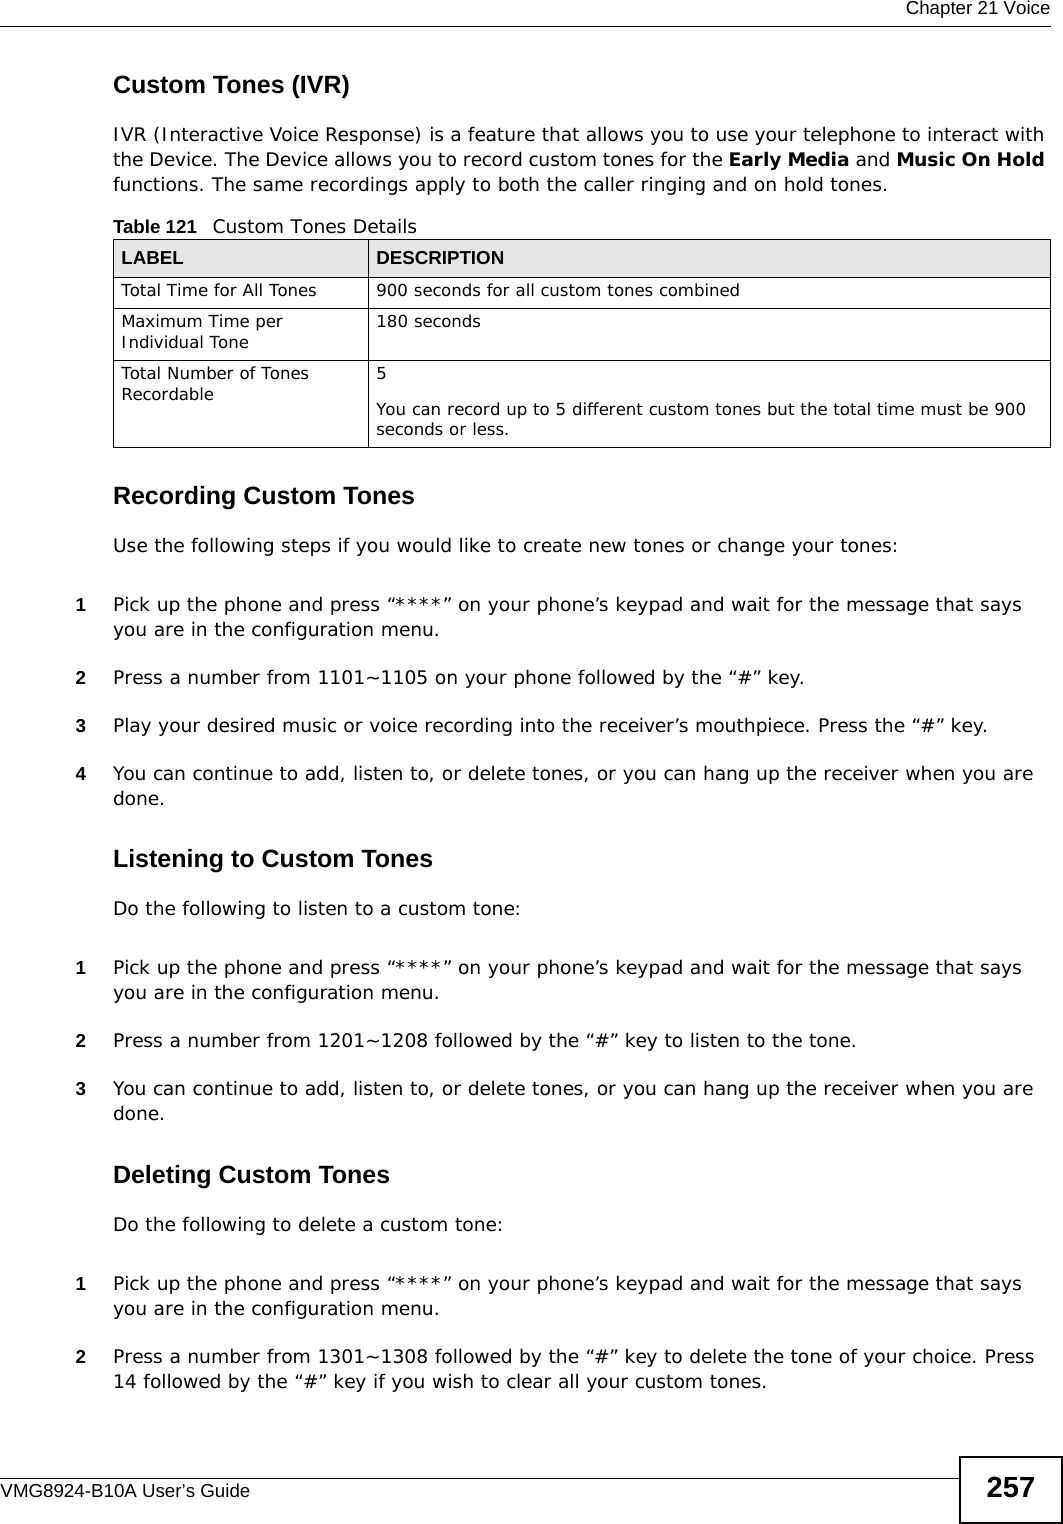  Chapter 21 VoiceVMG8924-B10A User’s Guide 257Custom Tones (IVR)IVR (Interactive Voice Response) is a feature that allows you to use your telephone to interact with the Device. The Device allows you to record custom tones for the Early Media and Music On Hold functions. The same recordings apply to both the caller ringing and on hold tones. Recording Custom TonesUse the following steps if you would like to create new tones or change your tones: 1Pick up the phone and press “****” on your phone’s keypad and wait for the message that says you are in the configuration menu. 2Press a number from 1101~1105 on your phone followed by the “#” key.3Play your desired music or voice recording into the receiver’s mouthpiece. Press the “#” key.4You can continue to add, listen to, or delete tones, or you can hang up the receiver when you are done.Listening to Custom TonesDo the following to listen to a custom tone:1Pick up the phone and press “****” on your phone’s keypad and wait for the message that says you are in the configuration menu.2Press a number from 1201~1208 followed by the “#” key to listen to the tone.3You can continue to add, listen to, or delete tones, or you can hang up the receiver when you are done.Deleting Custom TonesDo the following to delete a custom tone:1Pick up the phone and press “****” on your phone’s keypad and wait for the message that says you are in the configuration menu.2Press a number from 1301~1308 followed by the “#” key to delete the tone of your choice. Press 14 followed by the “#” key if you wish to clear all your custom tones.Table 121   Custom Tones DetailsLABEL DESCRIPTIONTotal Time for All Tones 900 seconds for all custom tones combinedMaximum Time per Individual Tone  180 secondsTotal Number of Tones Recordable 5You can record up to 5 different custom tones but the total time must be 900 seconds or less. 